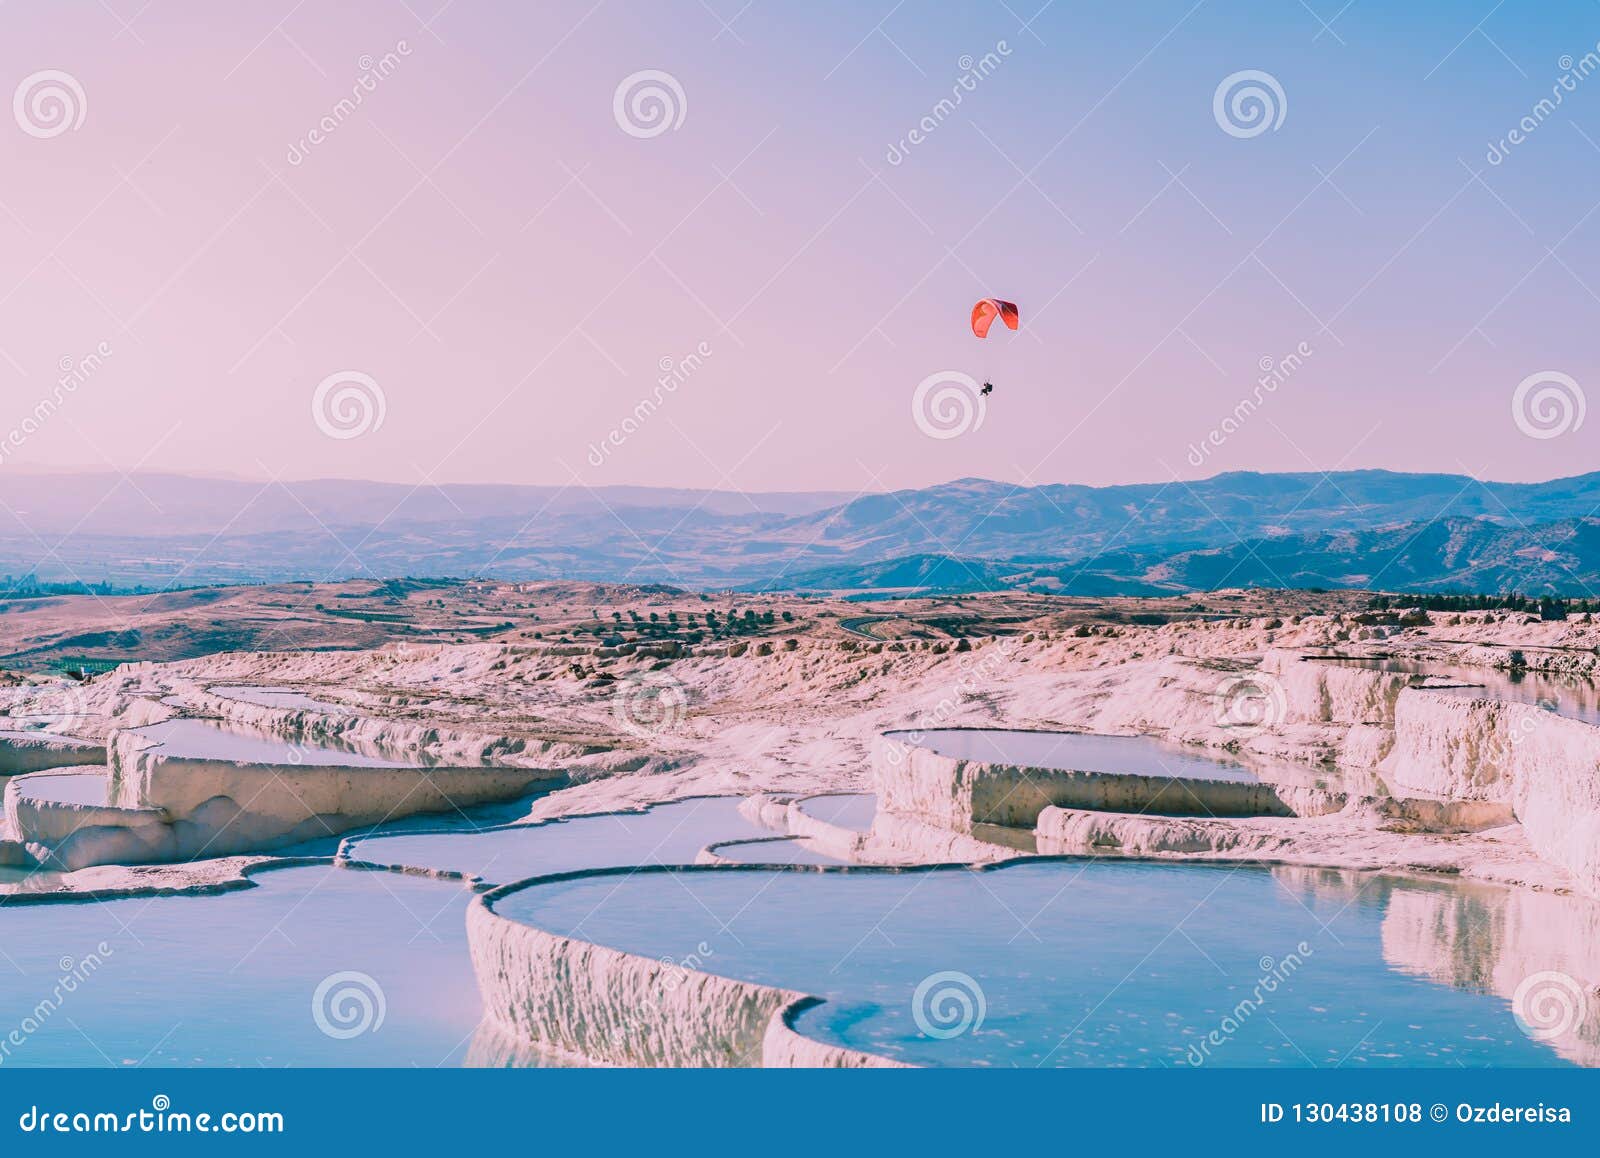 view of cotton castle in pamukkale, turkey.